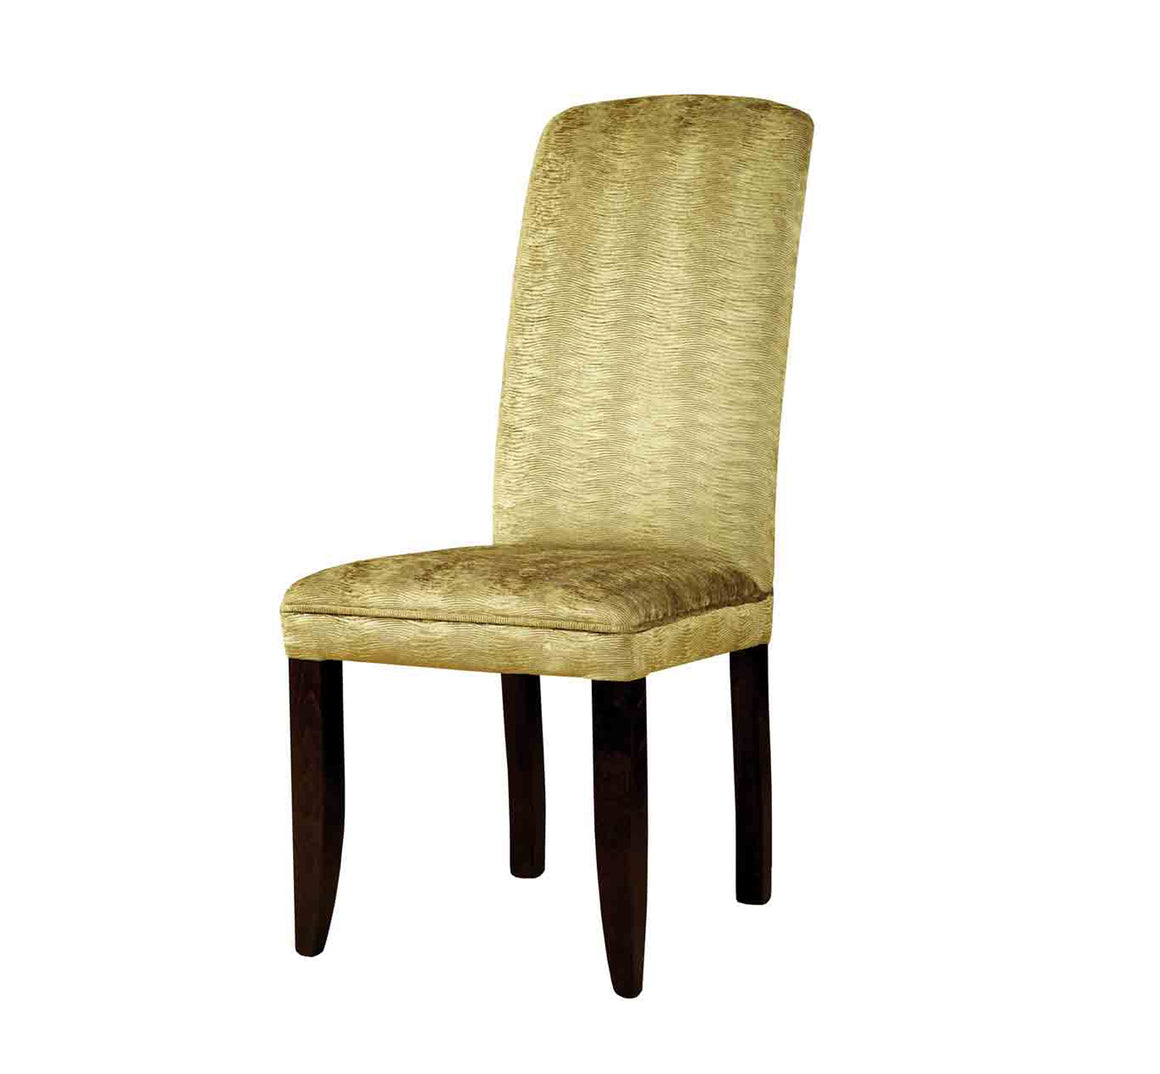 Surrey Dining Chair